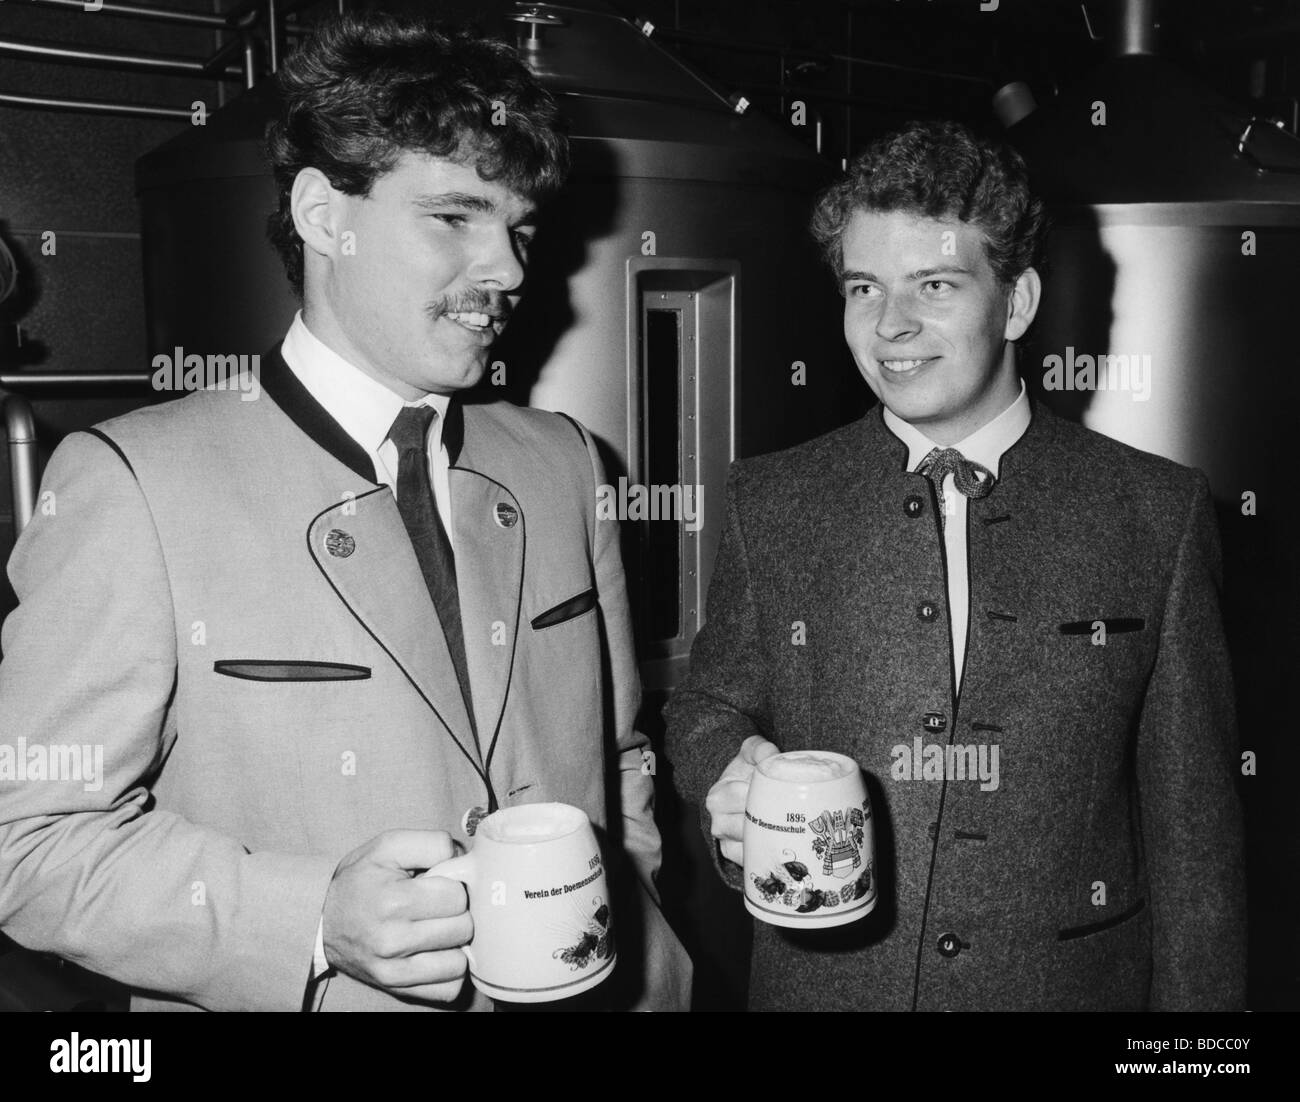 Schoerghuber, Stefan, 6.7.1961 - 25.11.2008, German businessman, half length, with Norman Kronseder, during inauguration of a brewery, Graefelfing, Germany, 24.9.1984, Stock Photo